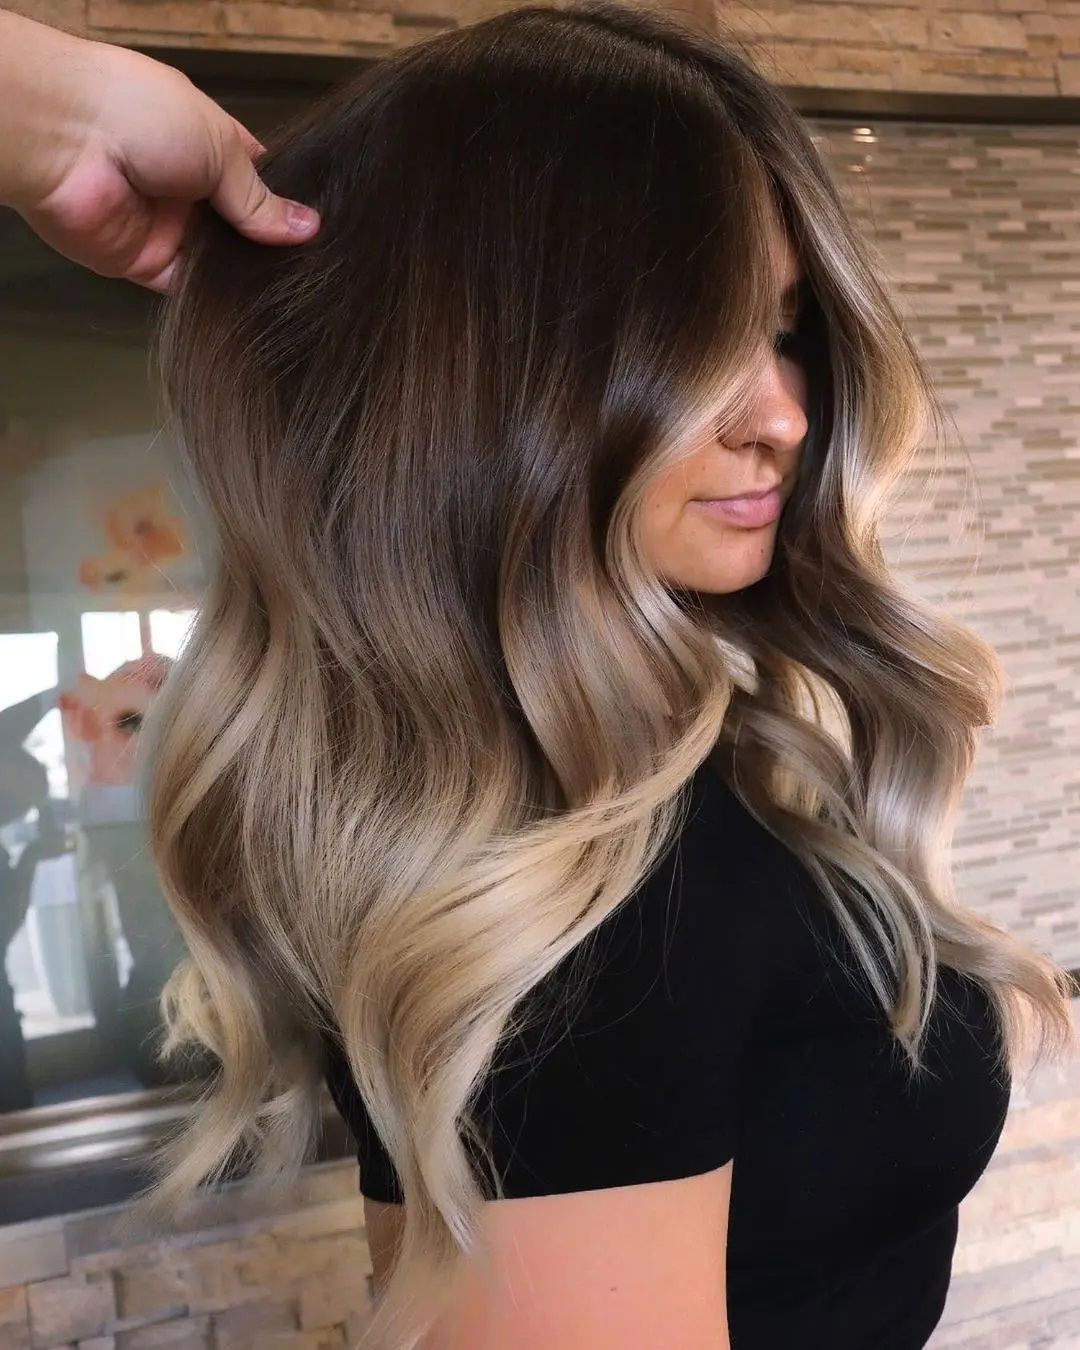 40 Greatest Long Hairstyles For Women With Long Hair In 2021 images 4